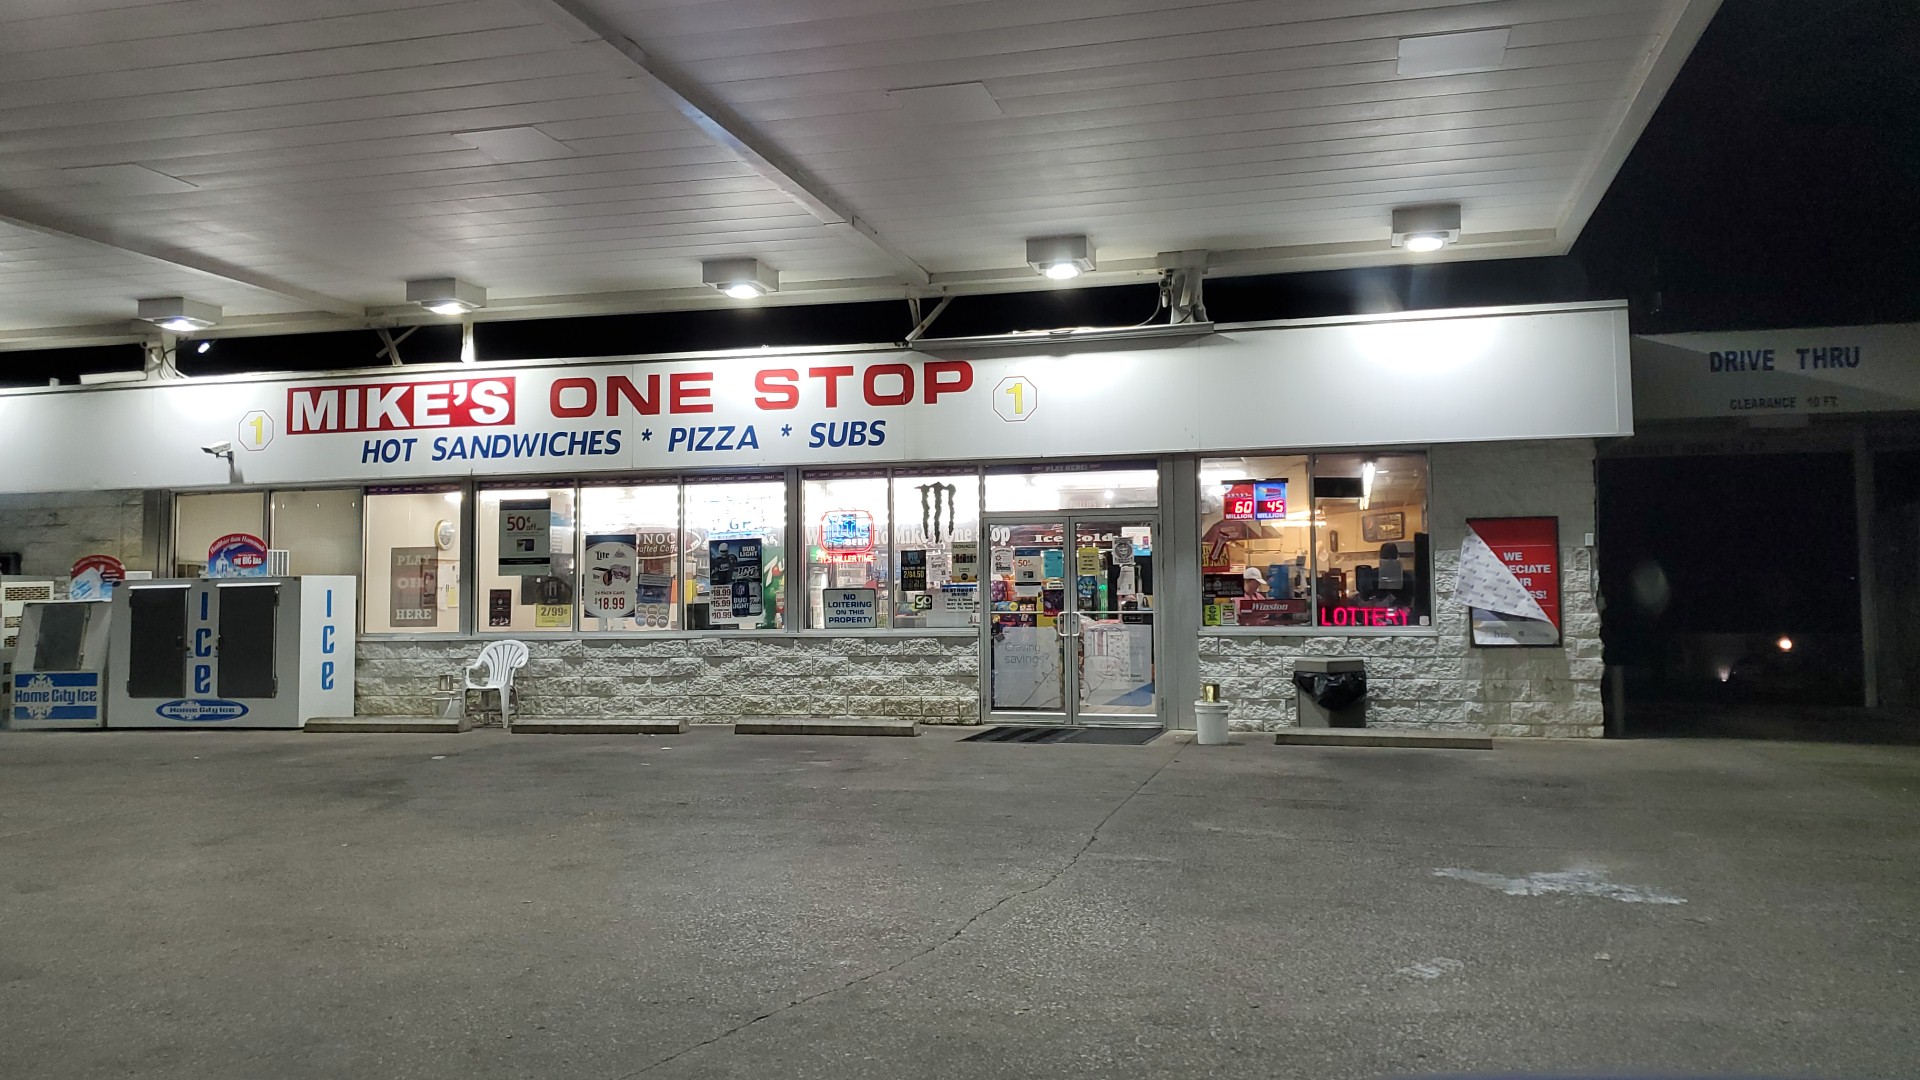 Mike's One Stop